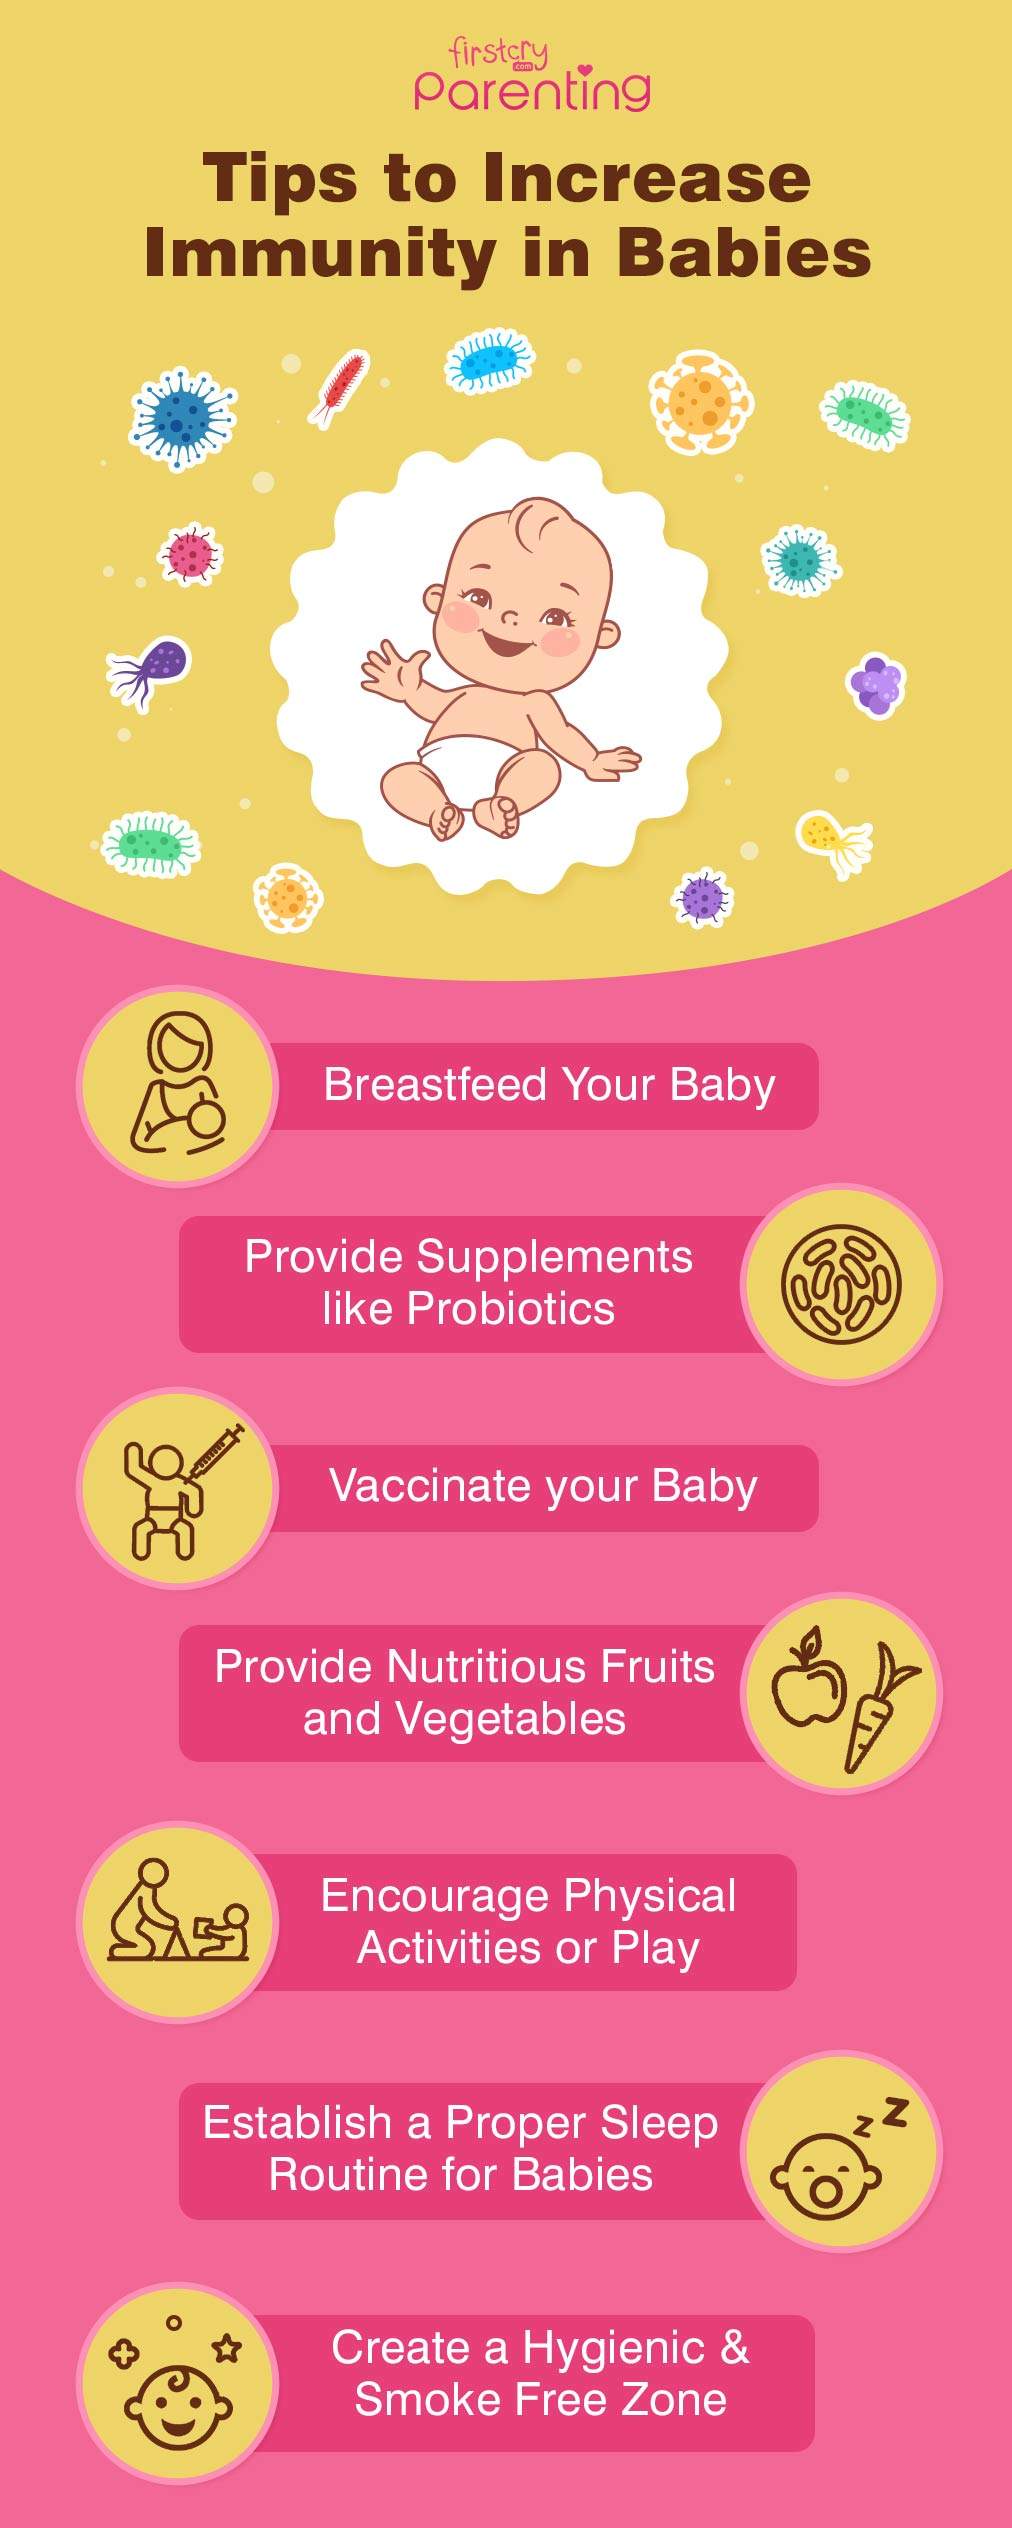 Tips to Increase Immunity in Babies